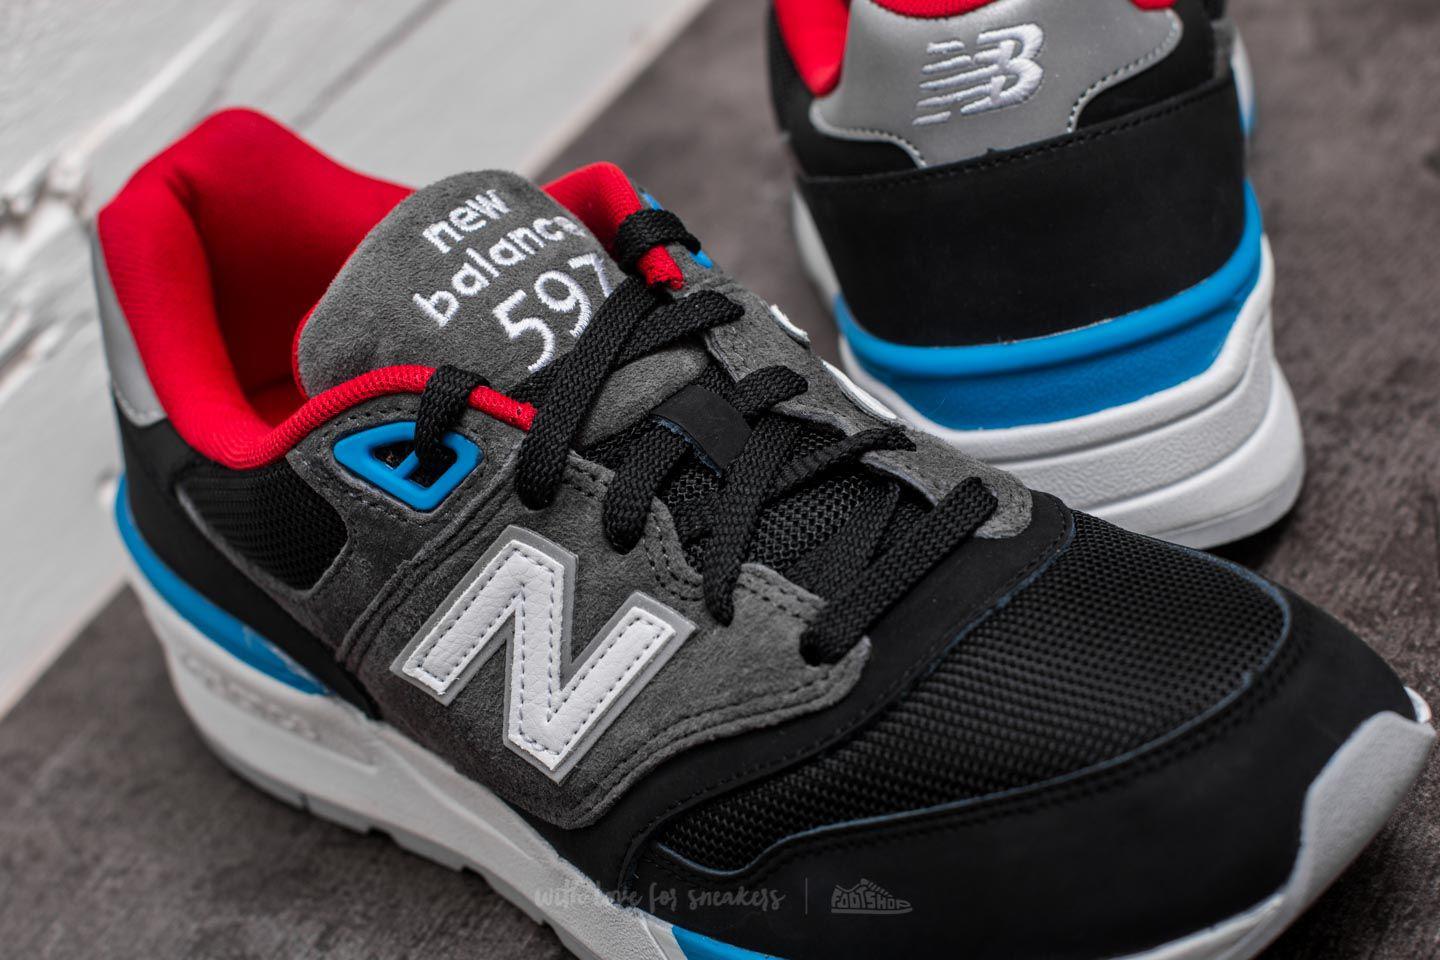 New Balance Leather 597 Black/ Grey/ Red-white-blue for Men - Lyst